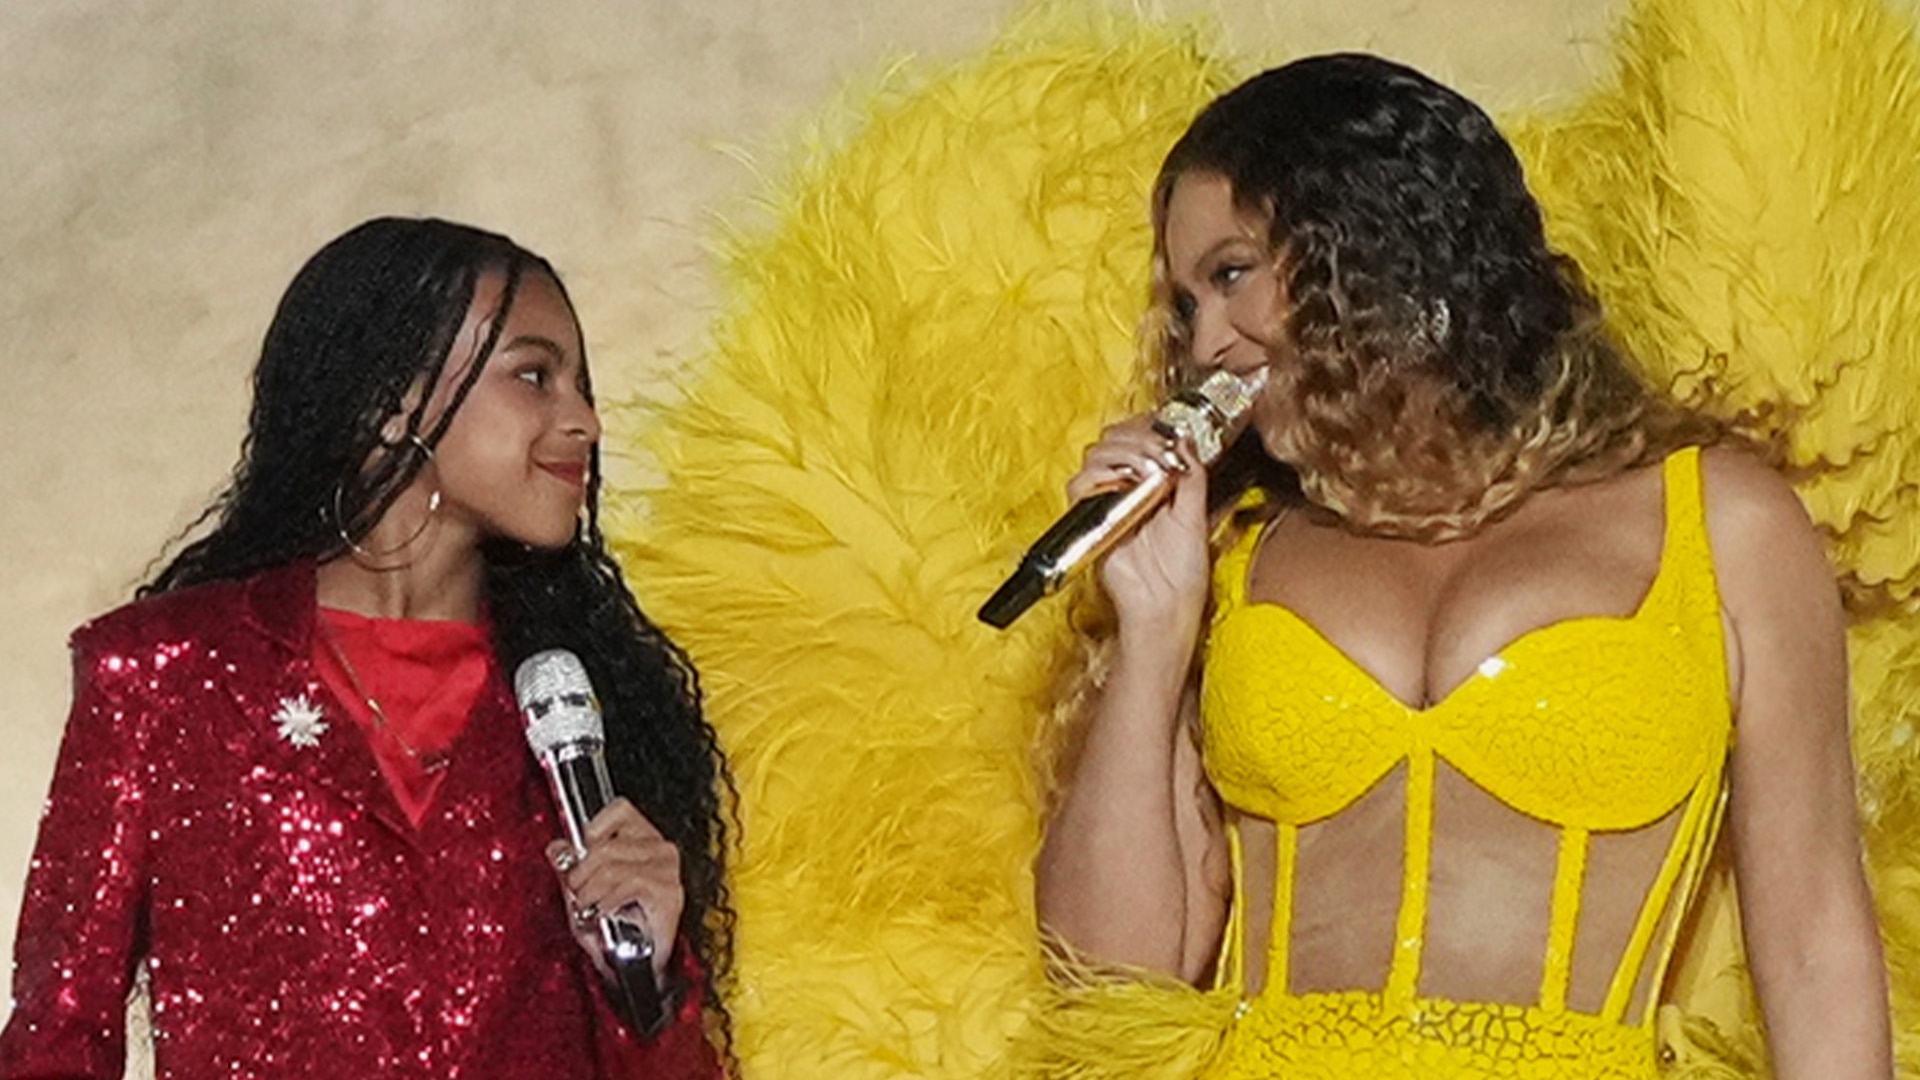 Beyoncé and Blue Ivy Match in Sequined Jerseys for Concert